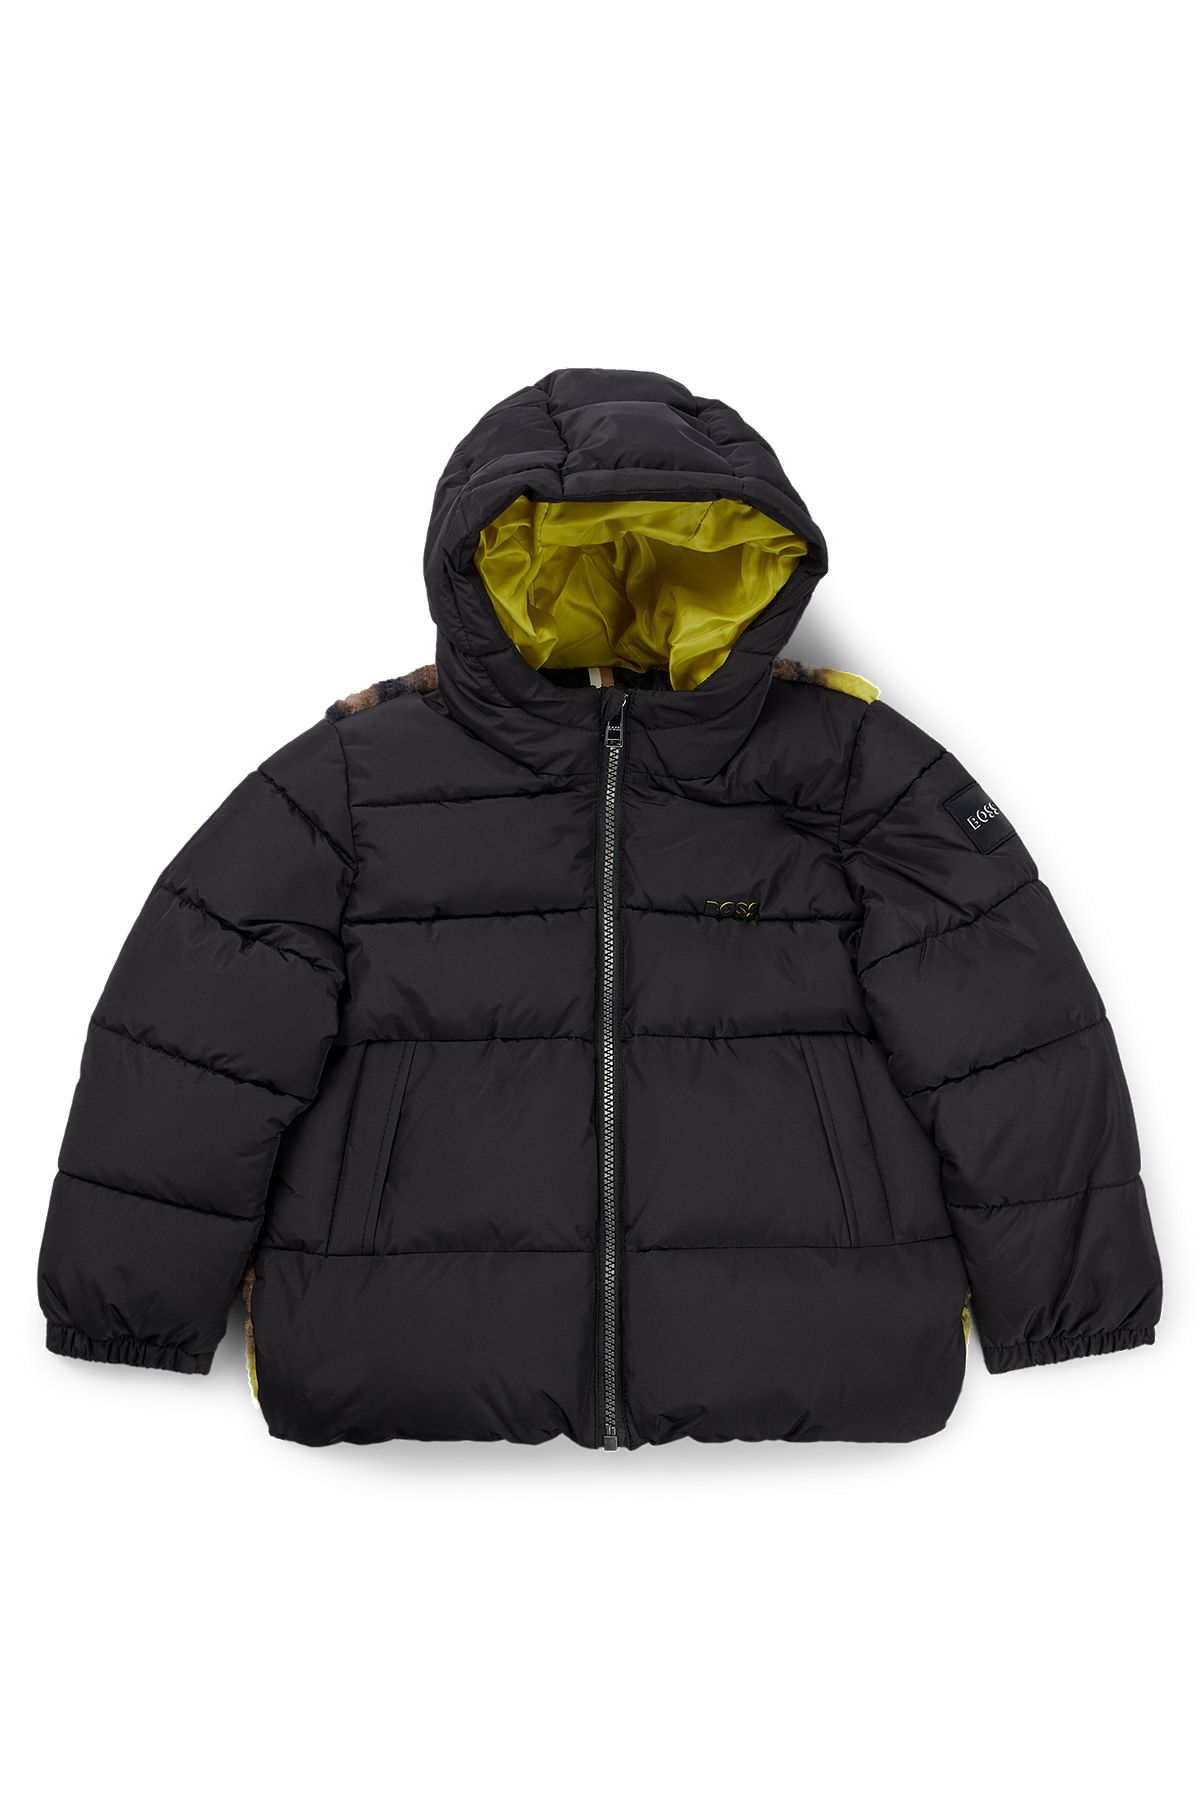 Kids' hooded jacket with camouflage sherpa back, Black